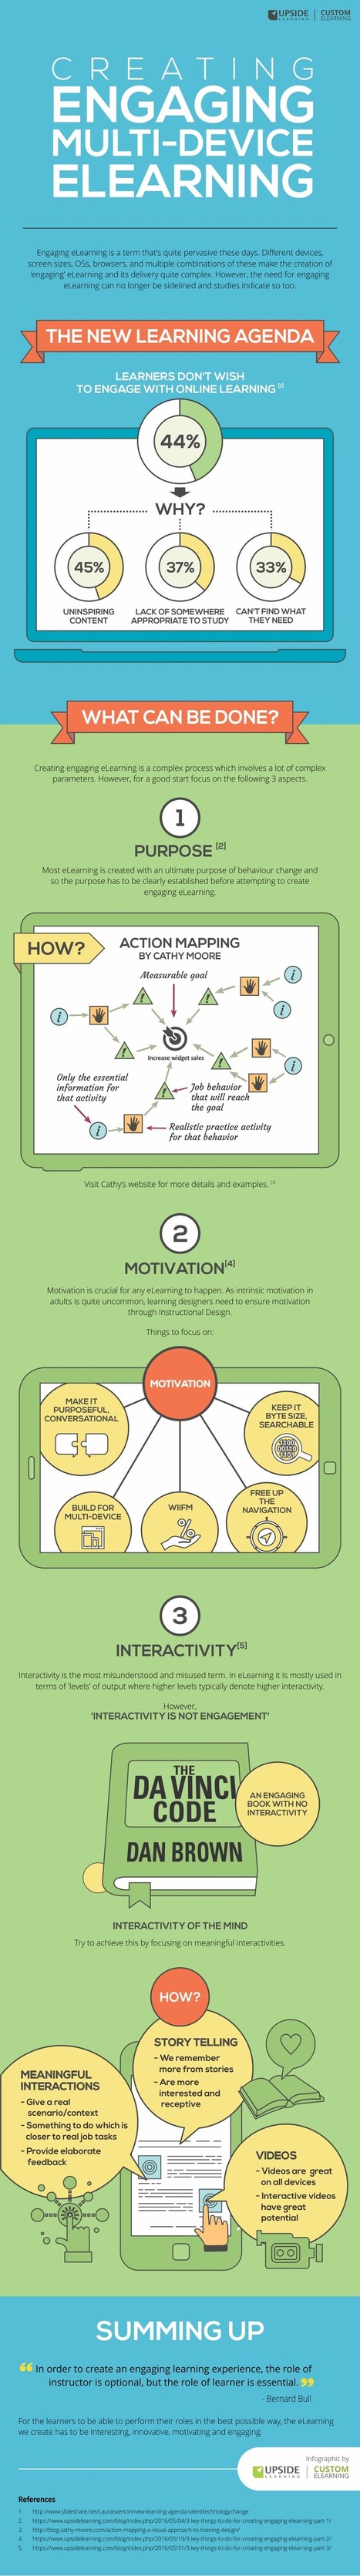 Infographics: Creating Engaging Multi-device eLearning | Consultancy Matters | Scoop.it